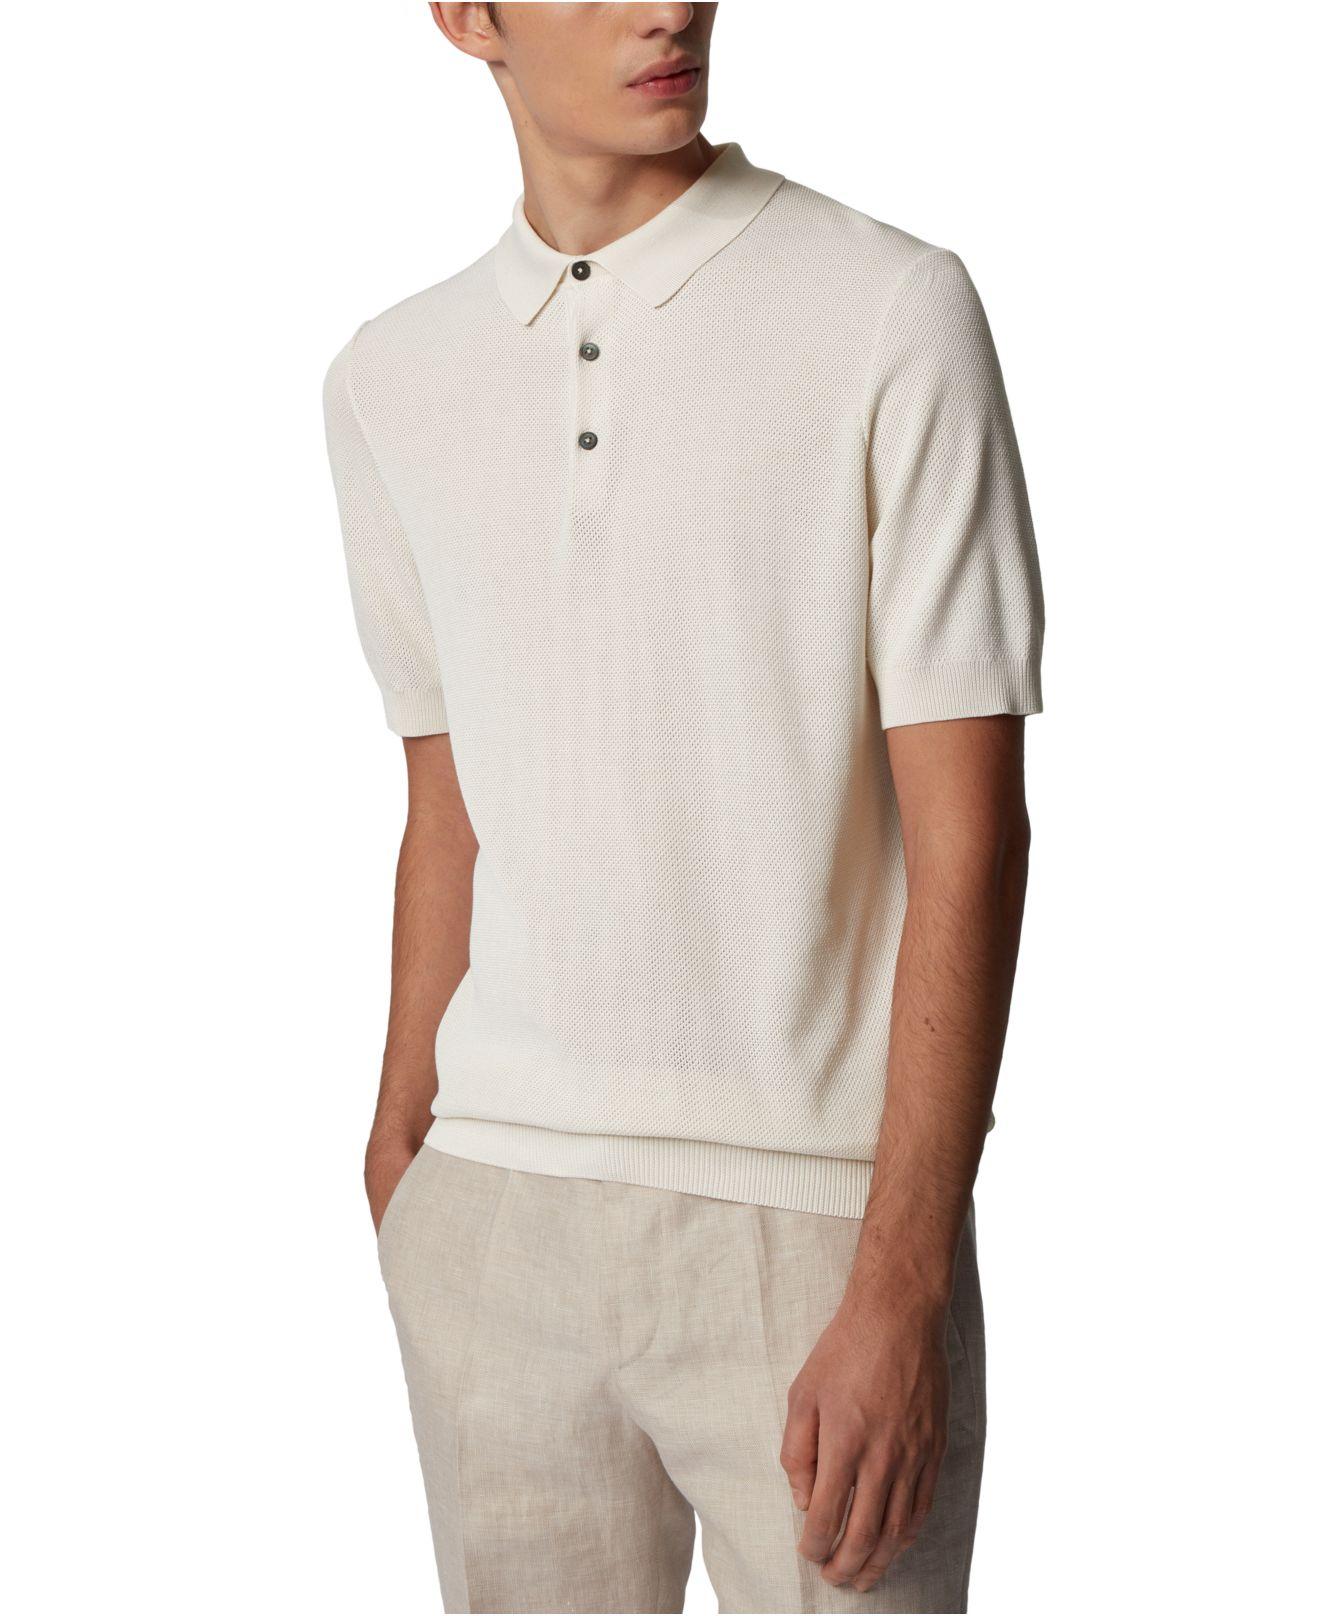 BOSS by Hugo Boss Silk T-omarco Polo Sweater in Natural for Men - Lyst